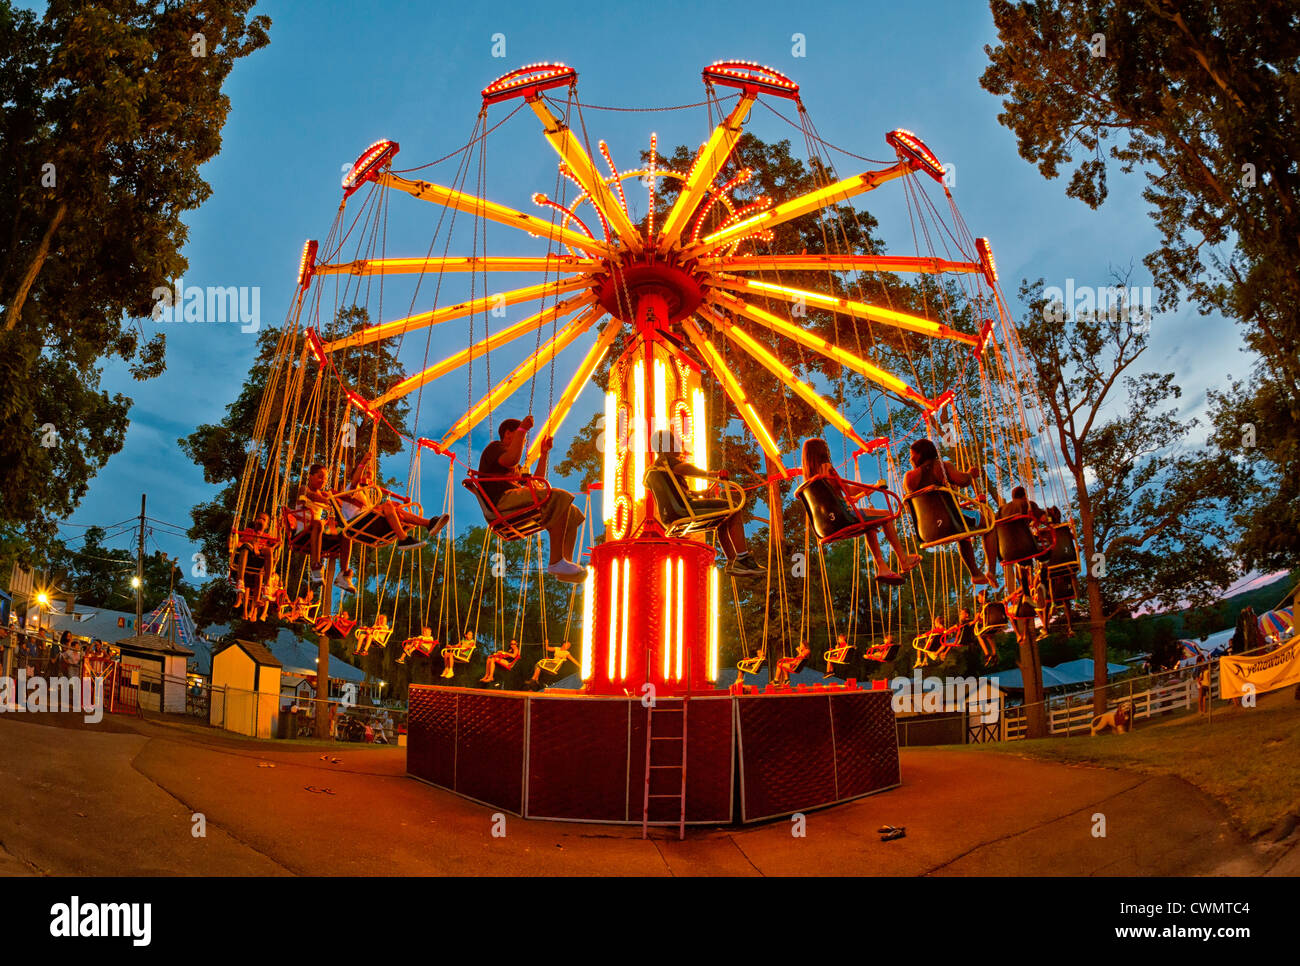 Aug. 25, 2012 - Middlebury, Connecticut, U.S.- People spinning on colorfully lit Swing ride at night, at Quassy Amusement Park. Stock Photo